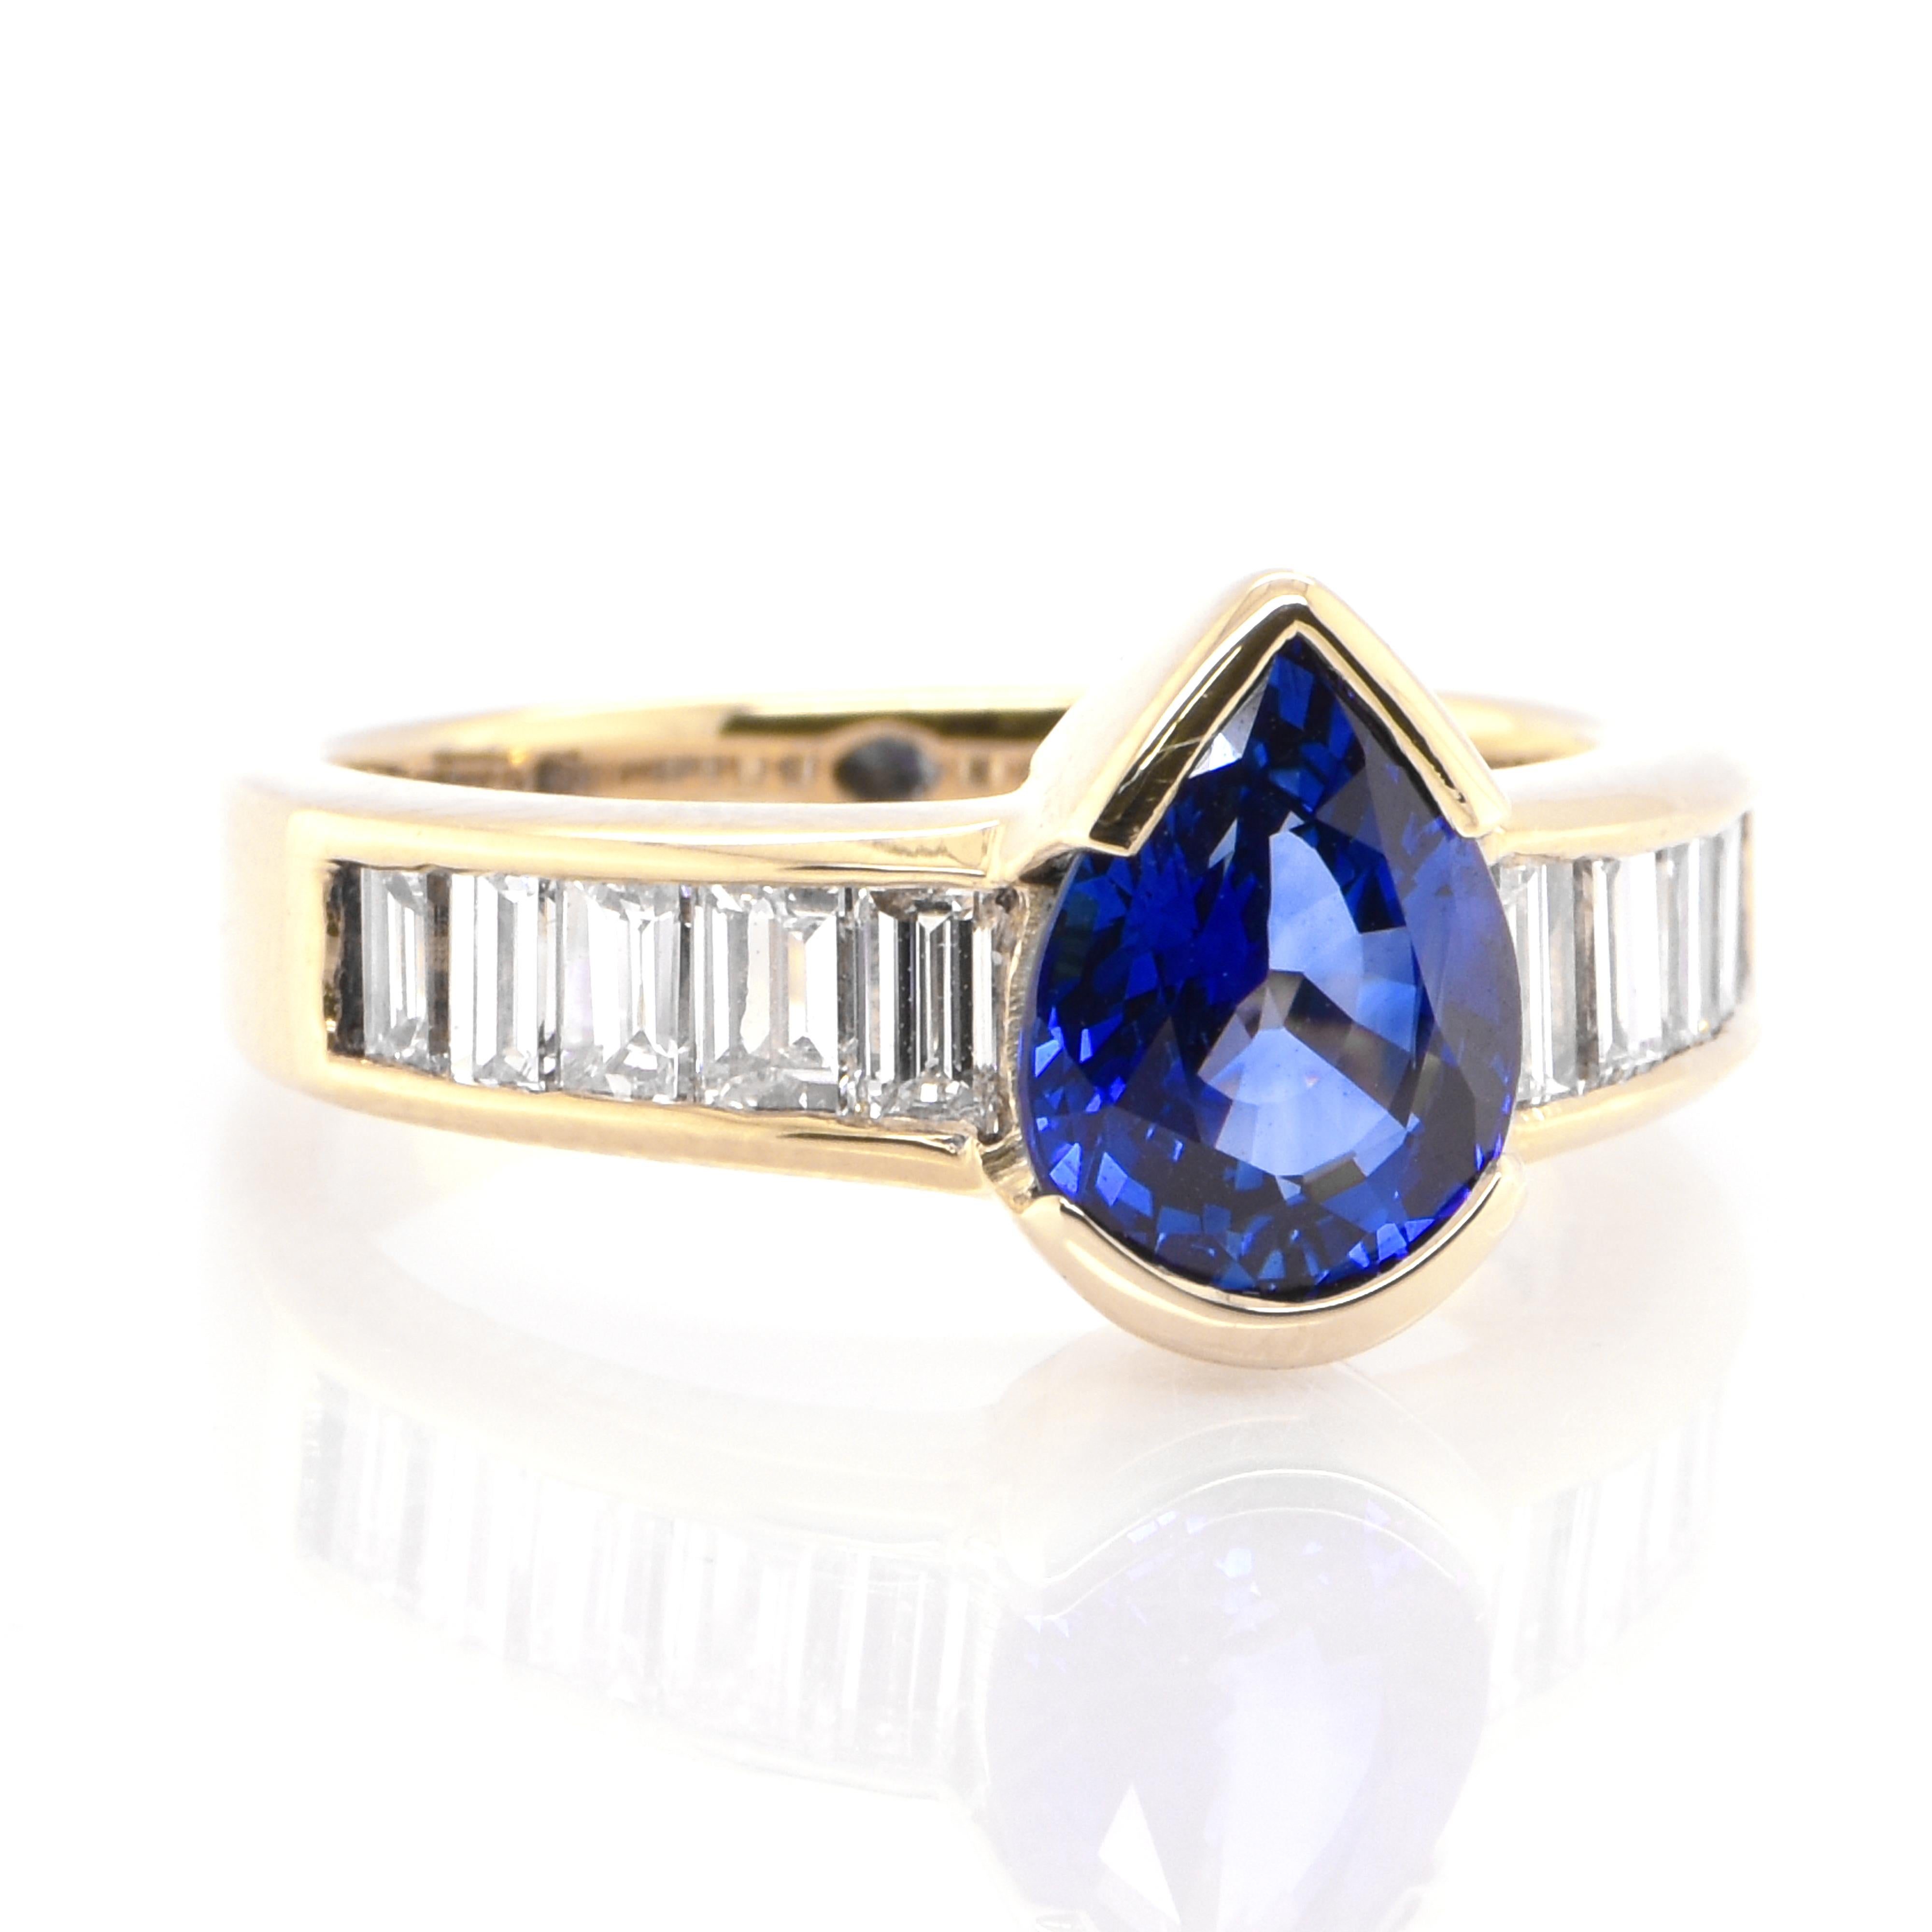 Modern 2.17 Carat Natural Sapphire and Diamond Baguette Ring Set in 18k Yellow Gold